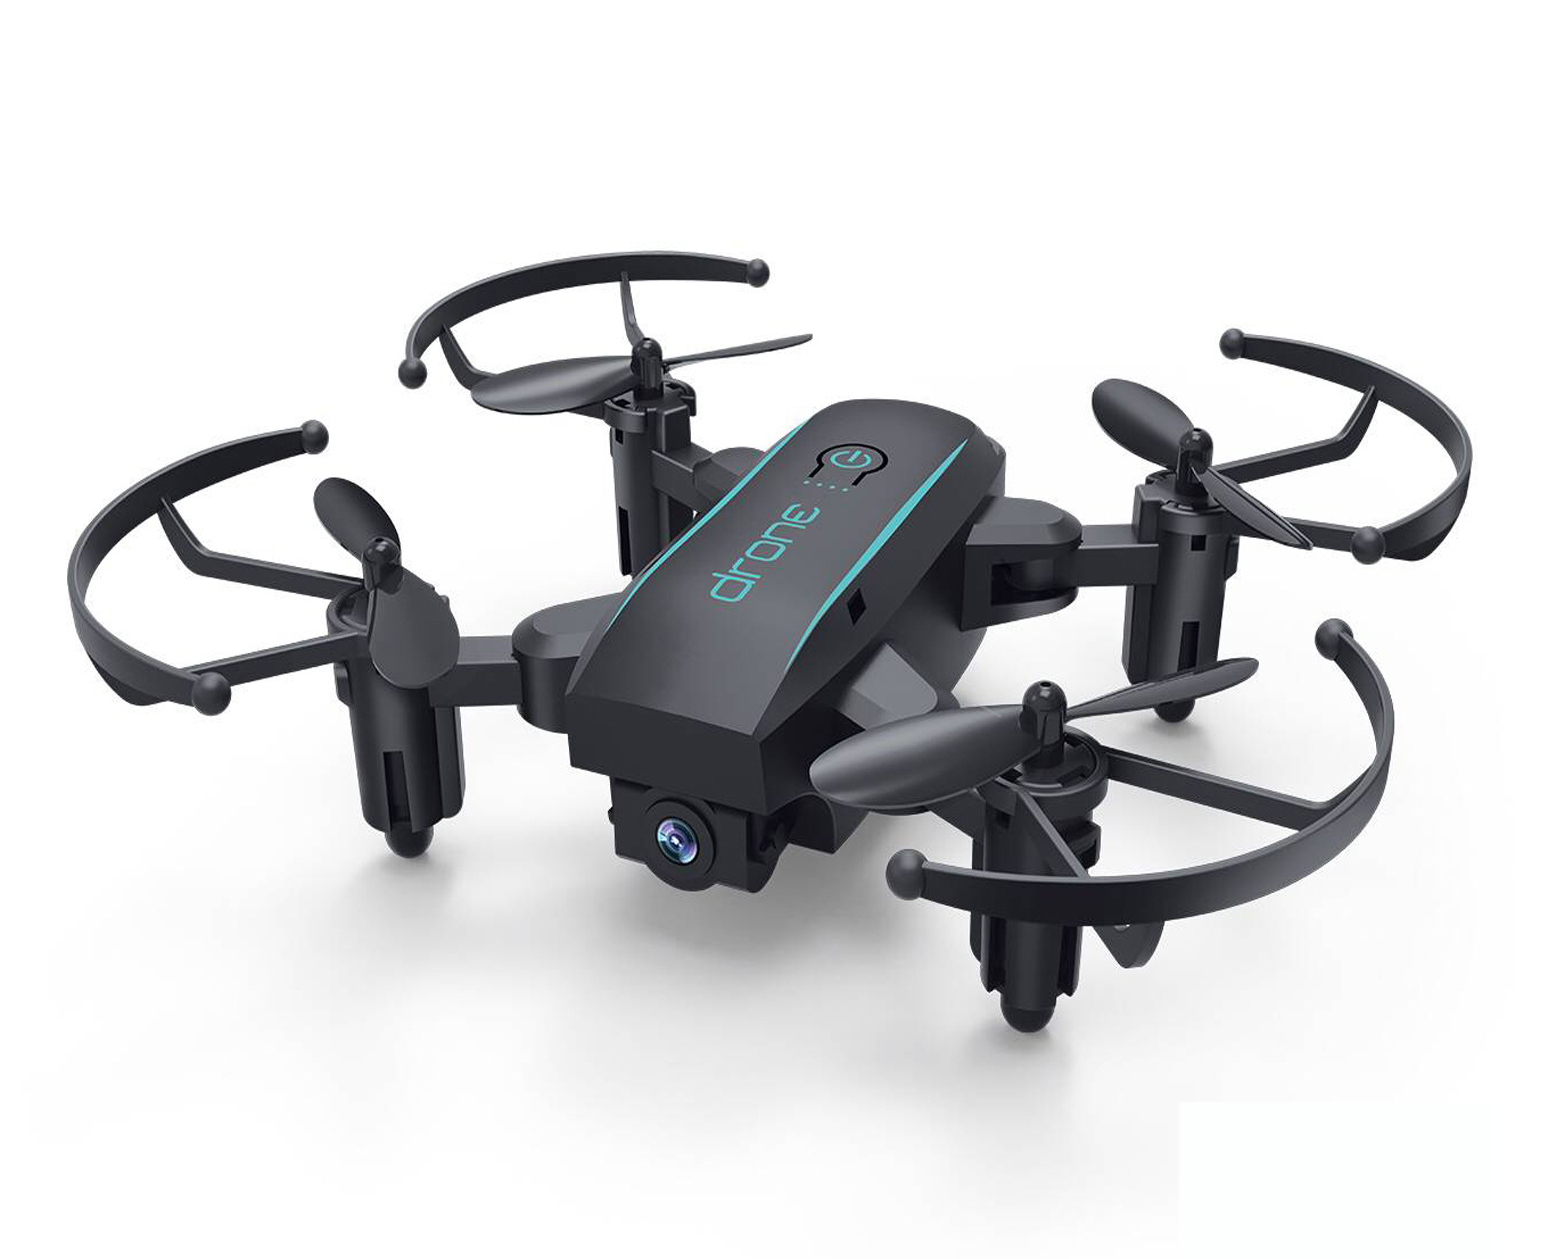 singda hot sale pocket drone with wifi real-time transmission